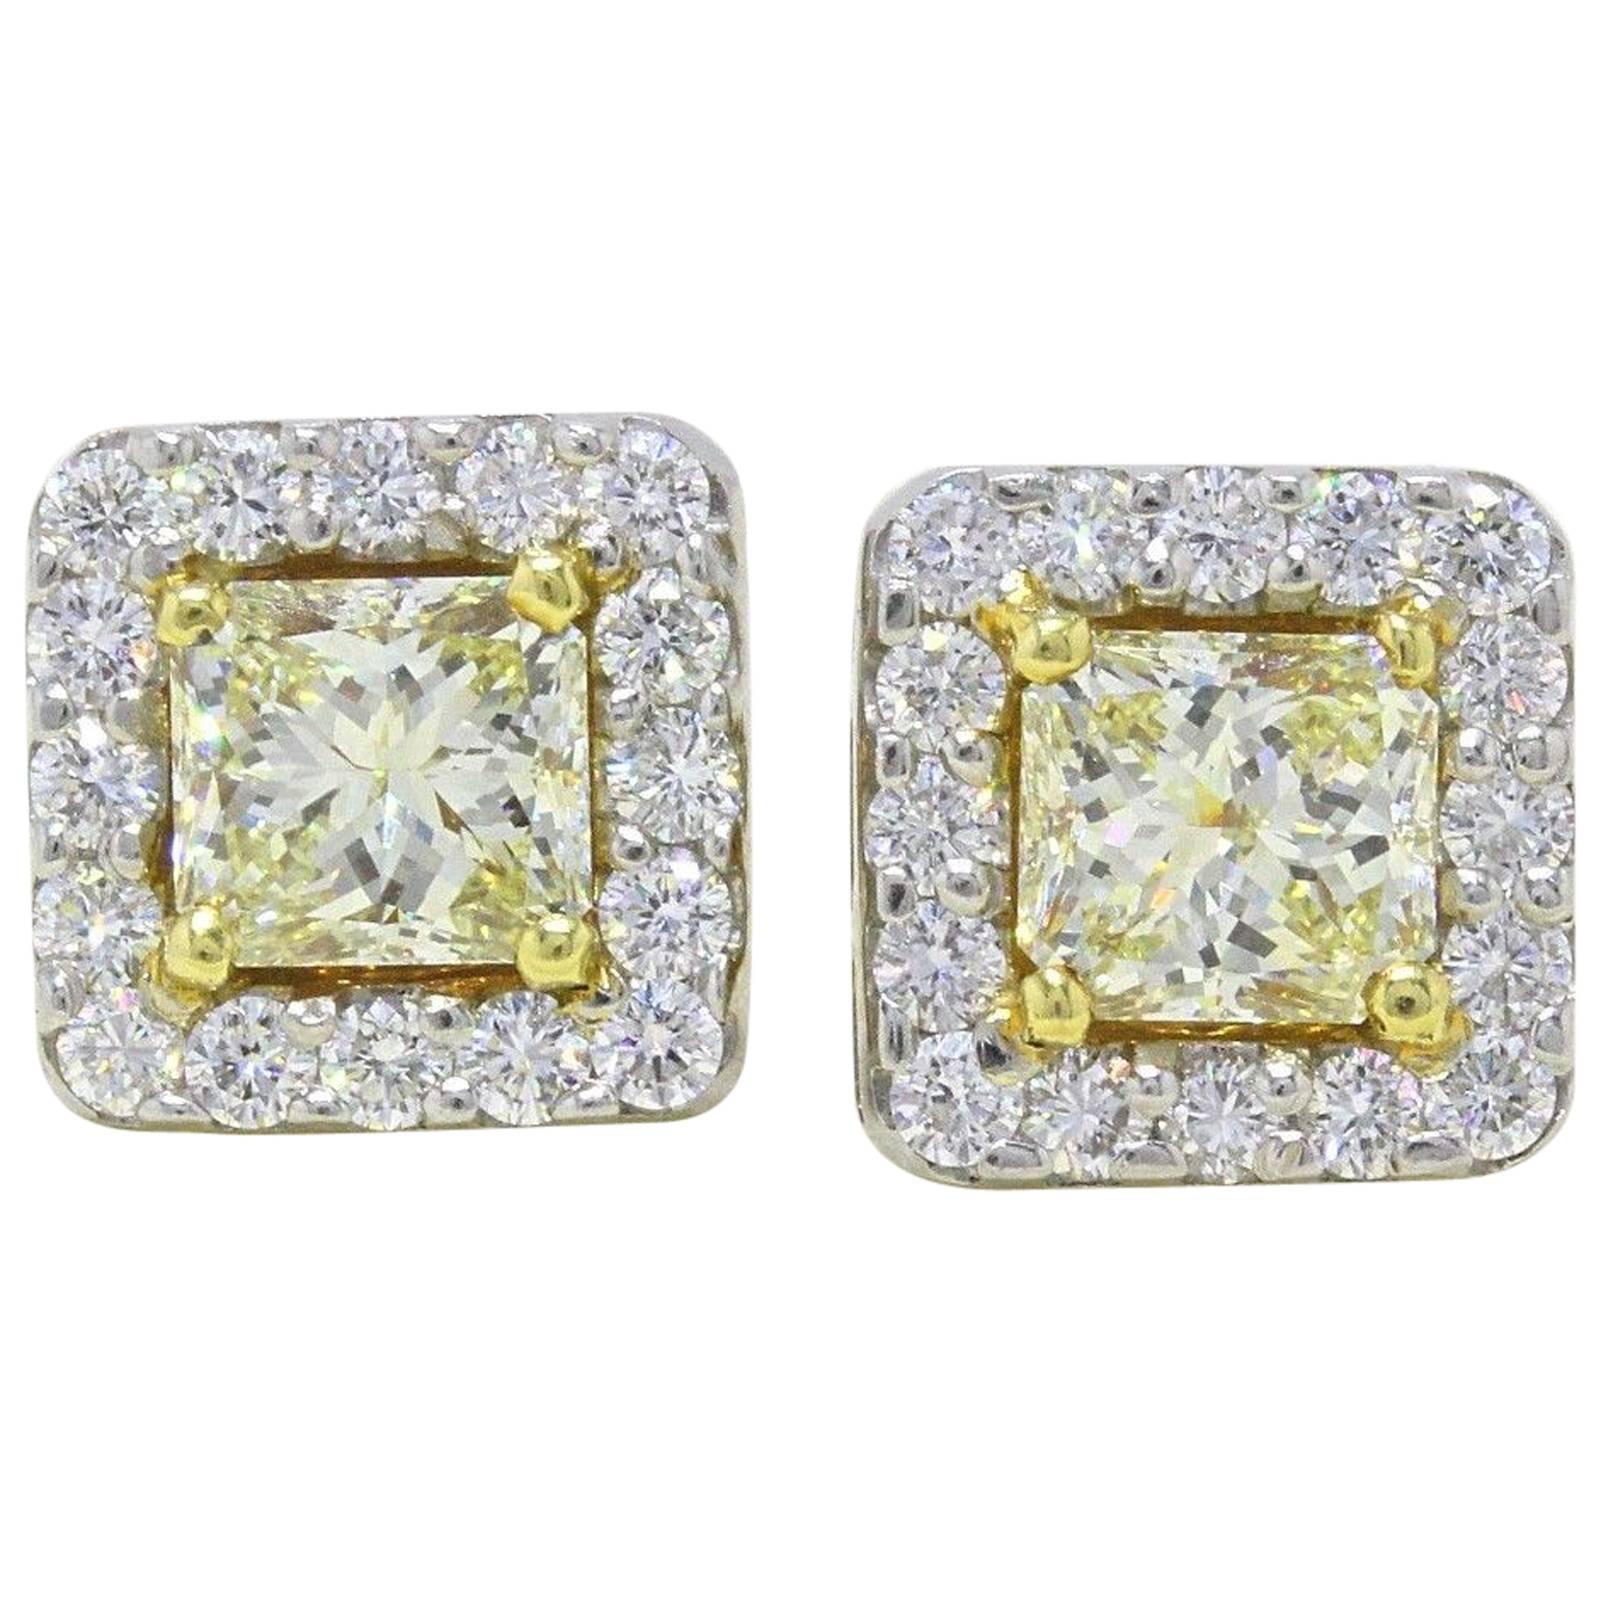 Light Yellow Princess Halo 3.96 TCW Diamond Earrings in 18K White & Yellow Gold For Sale